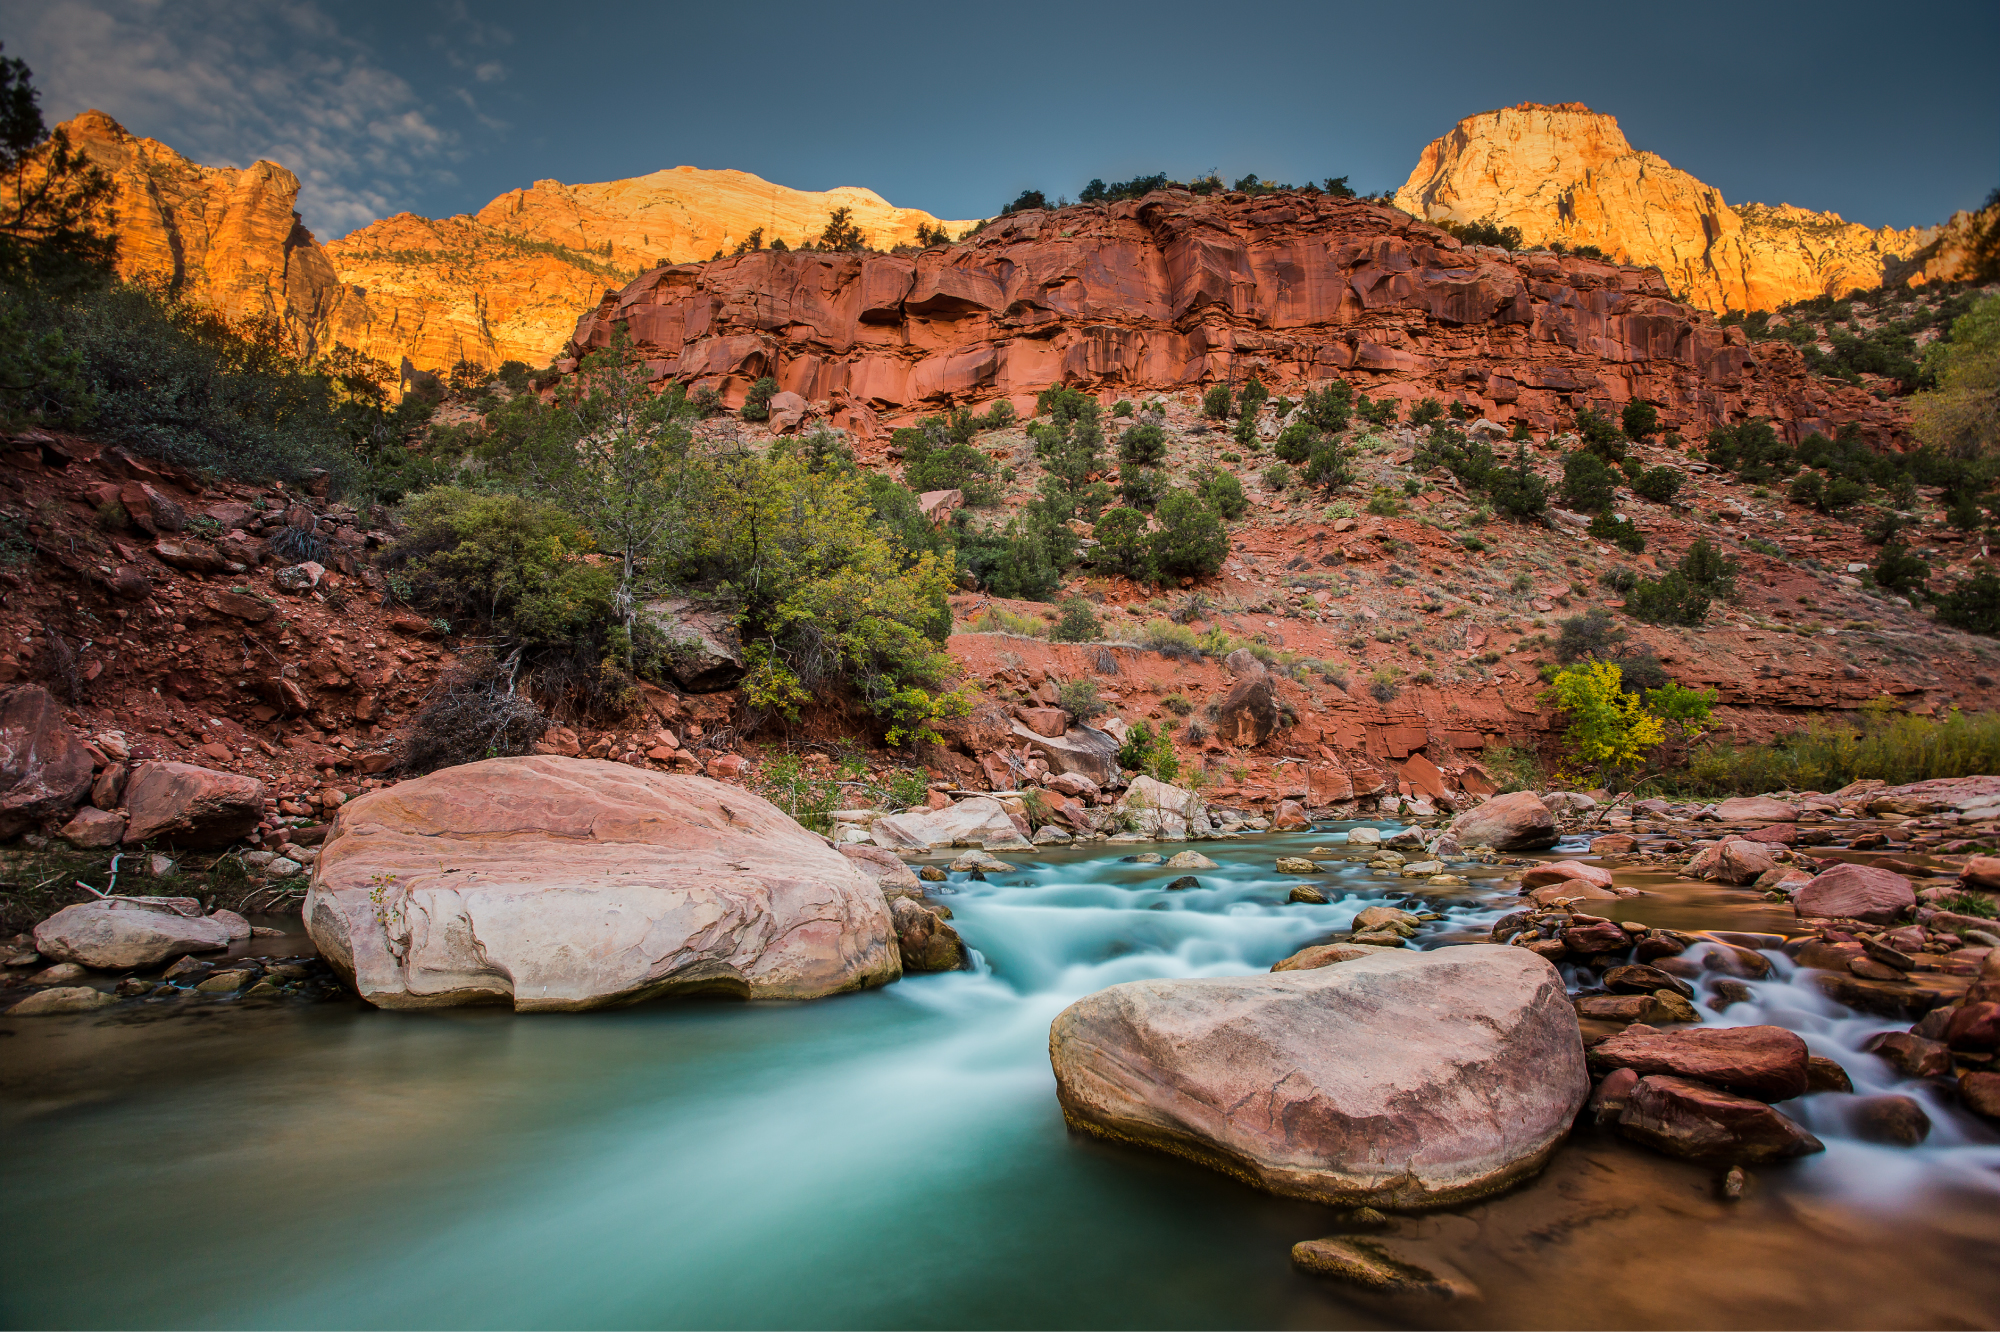 HDR Photography Workshop: Zion River HDR | Pt.4 | HDR Processing